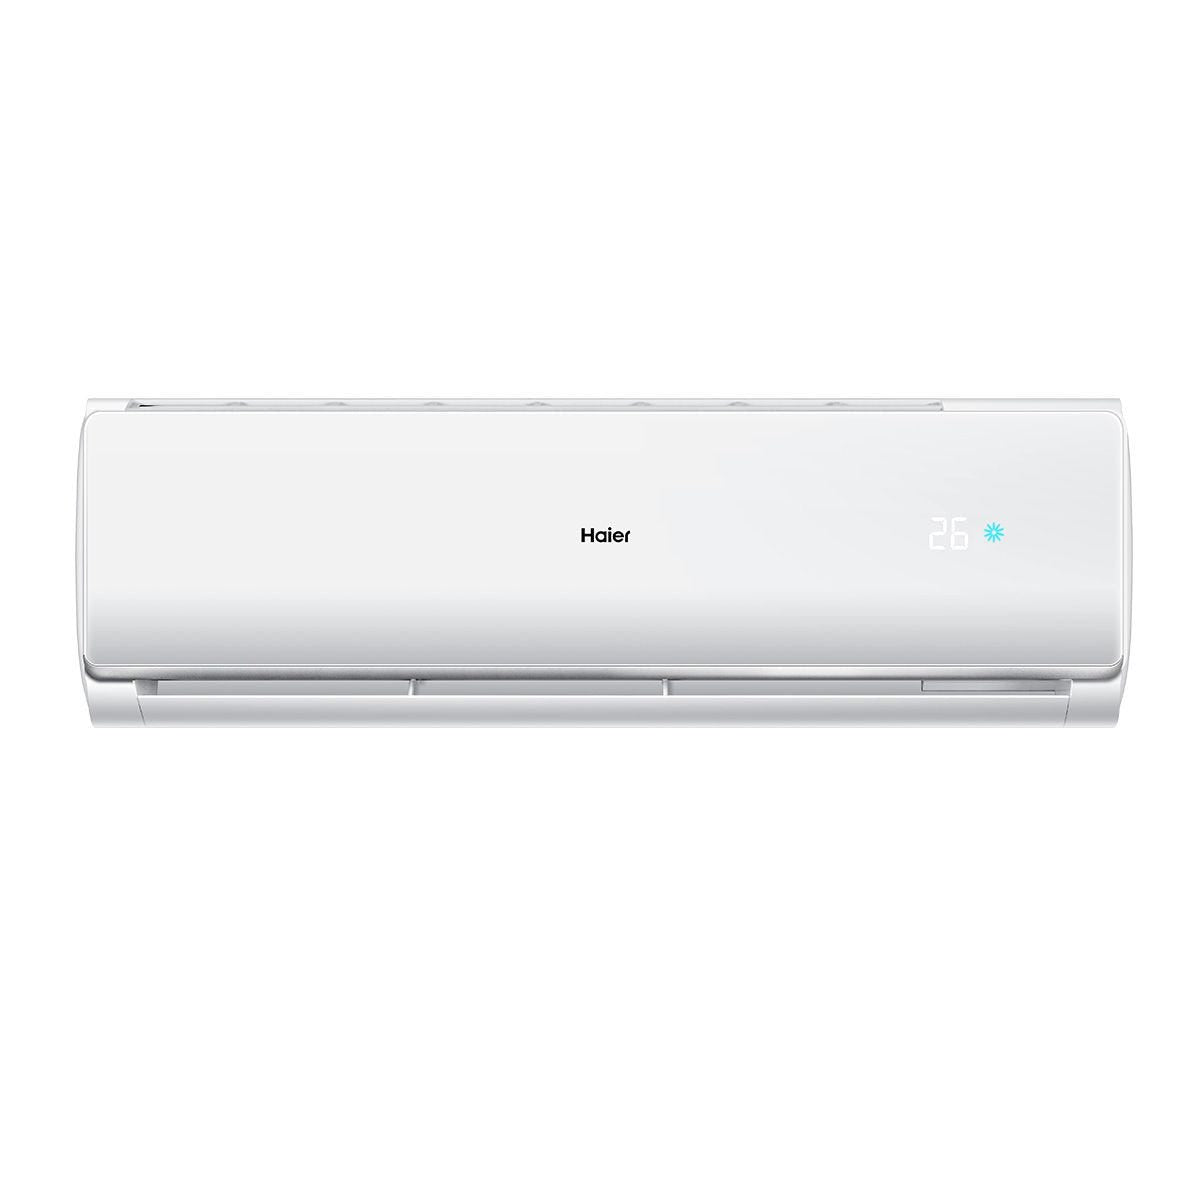 Haier Split Air Conditioner, Cooling Only, 1.5 HP, White - HSU-12KCSOC